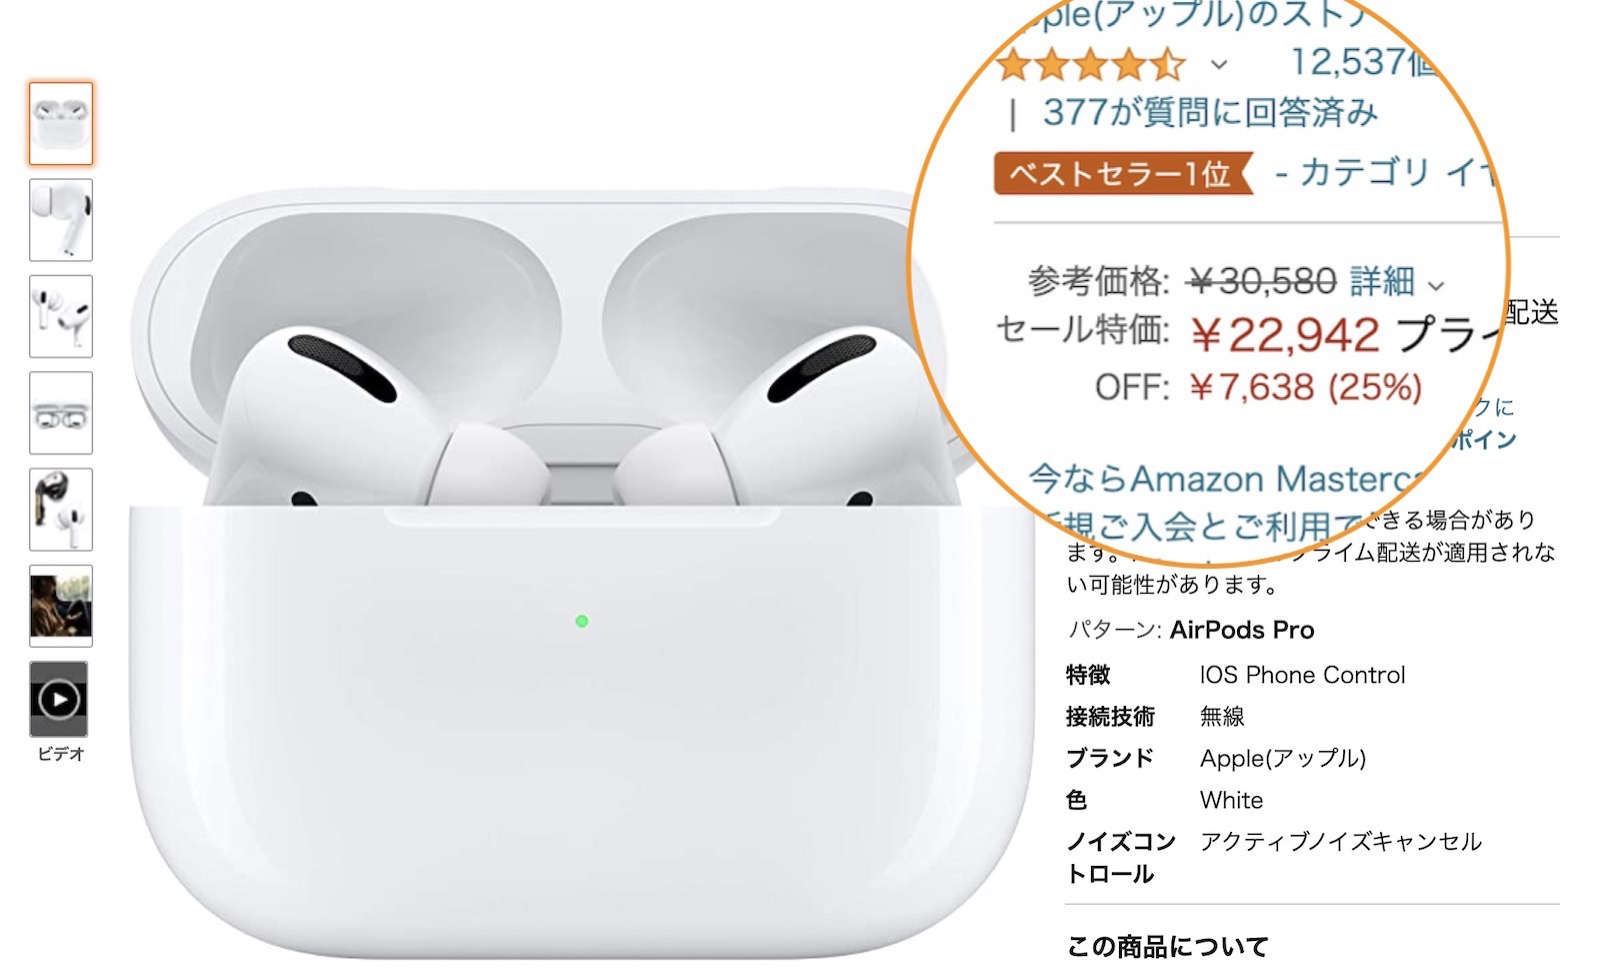 Airpods pro even lower price